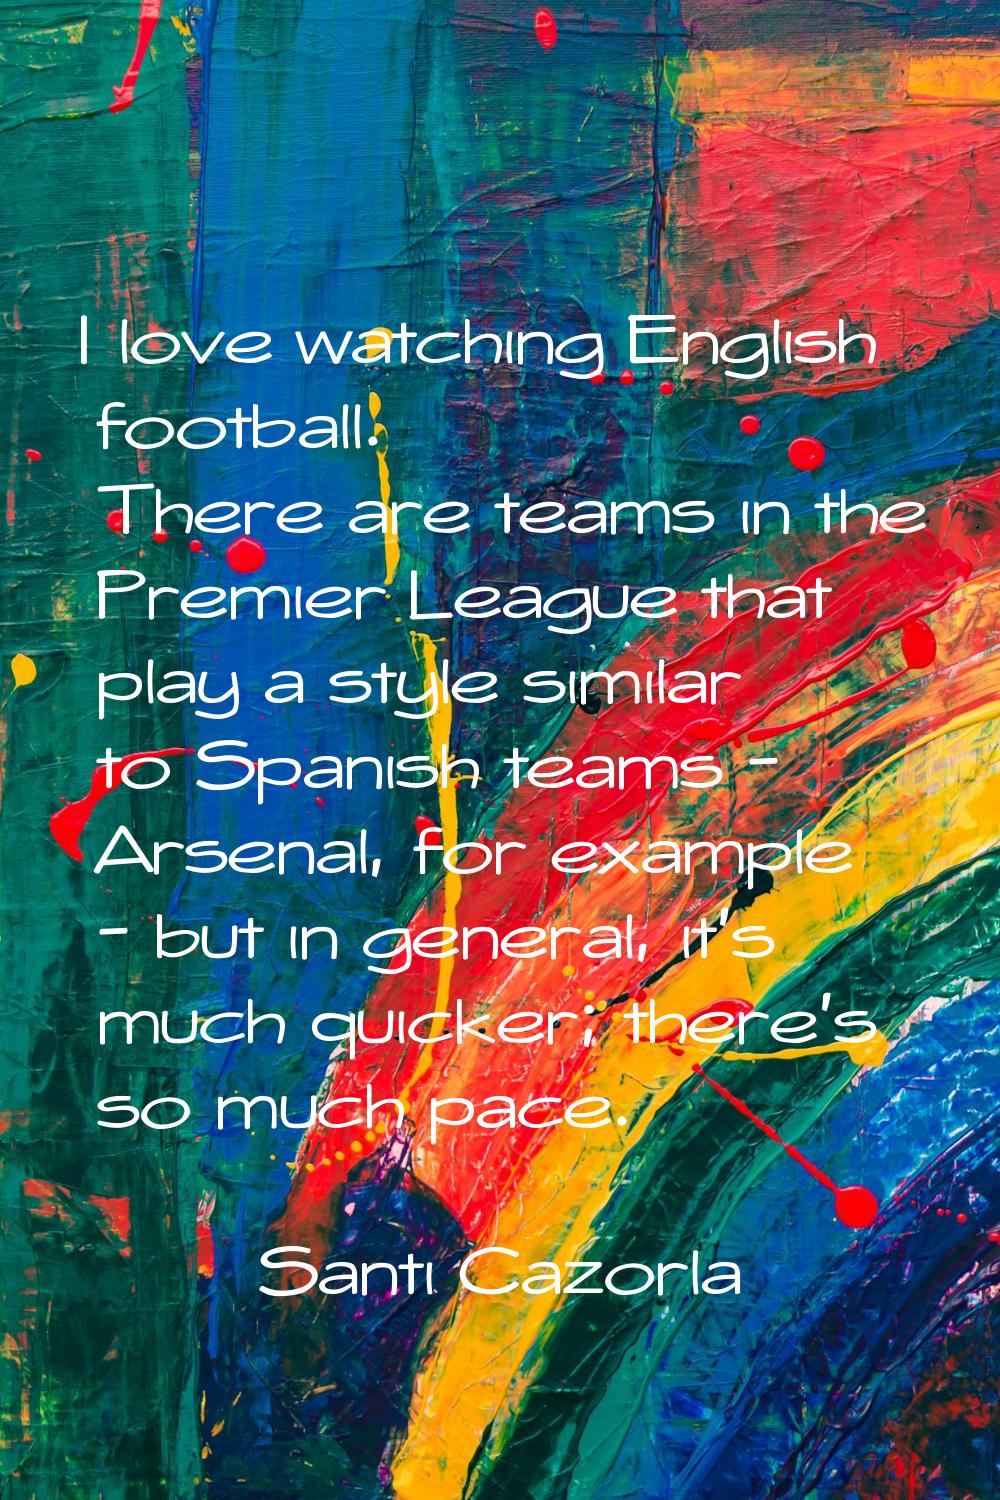 I love watching English football. There are teams in the Premier League that play a style similar t